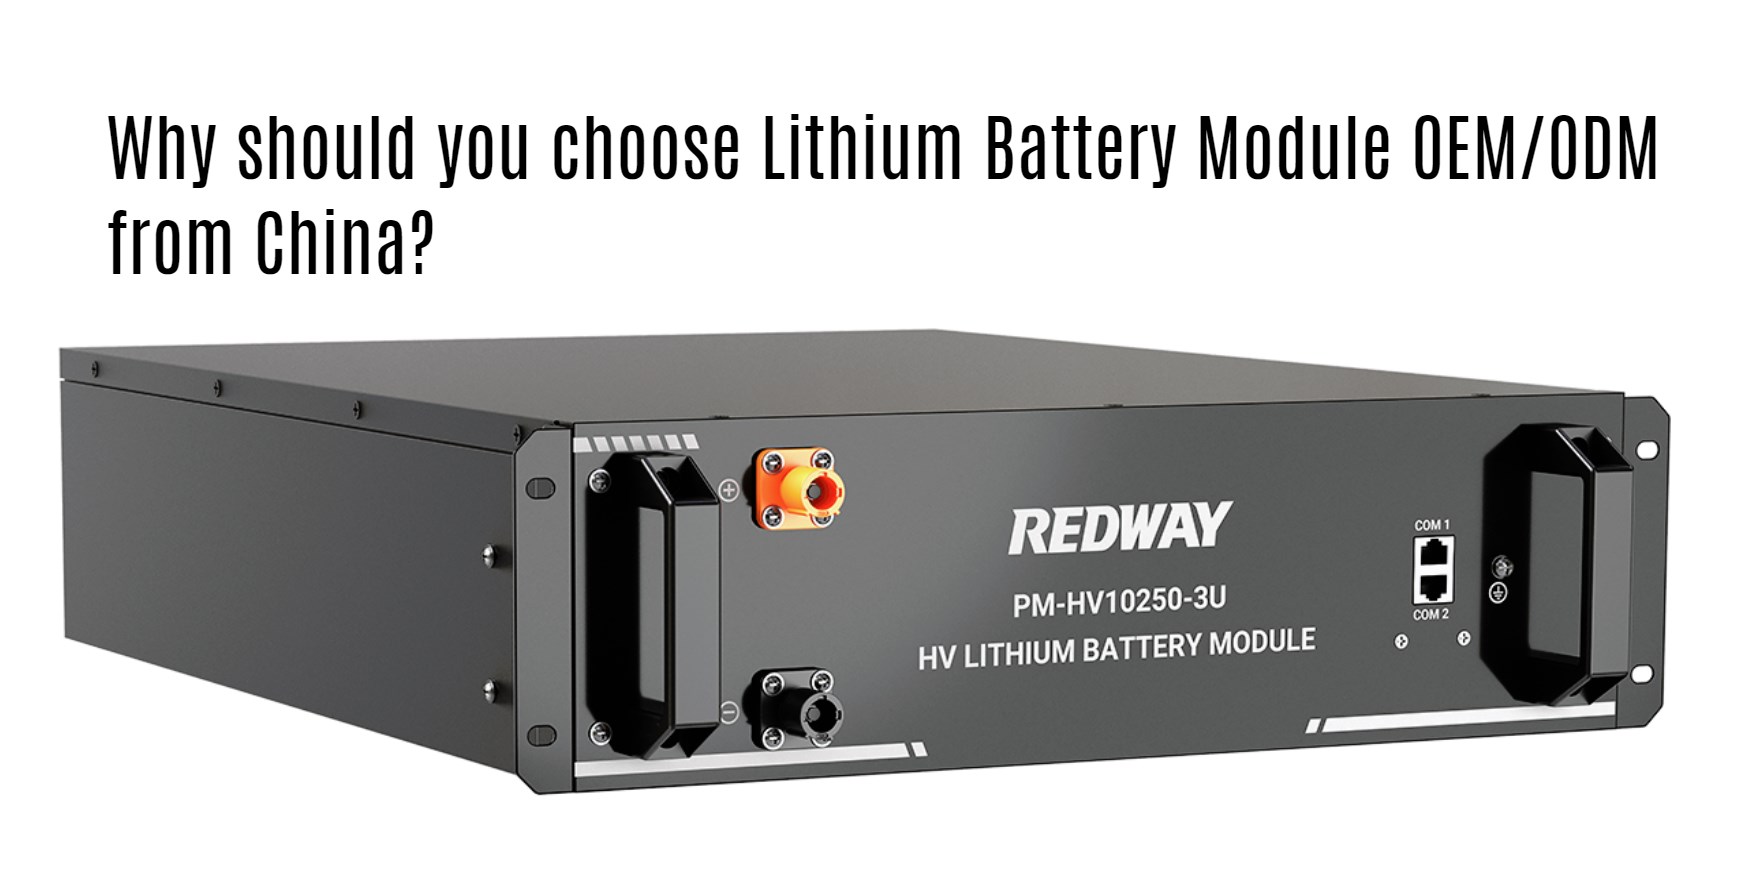 Why should you choose Lithium Battery Module OEM/ODM from China?